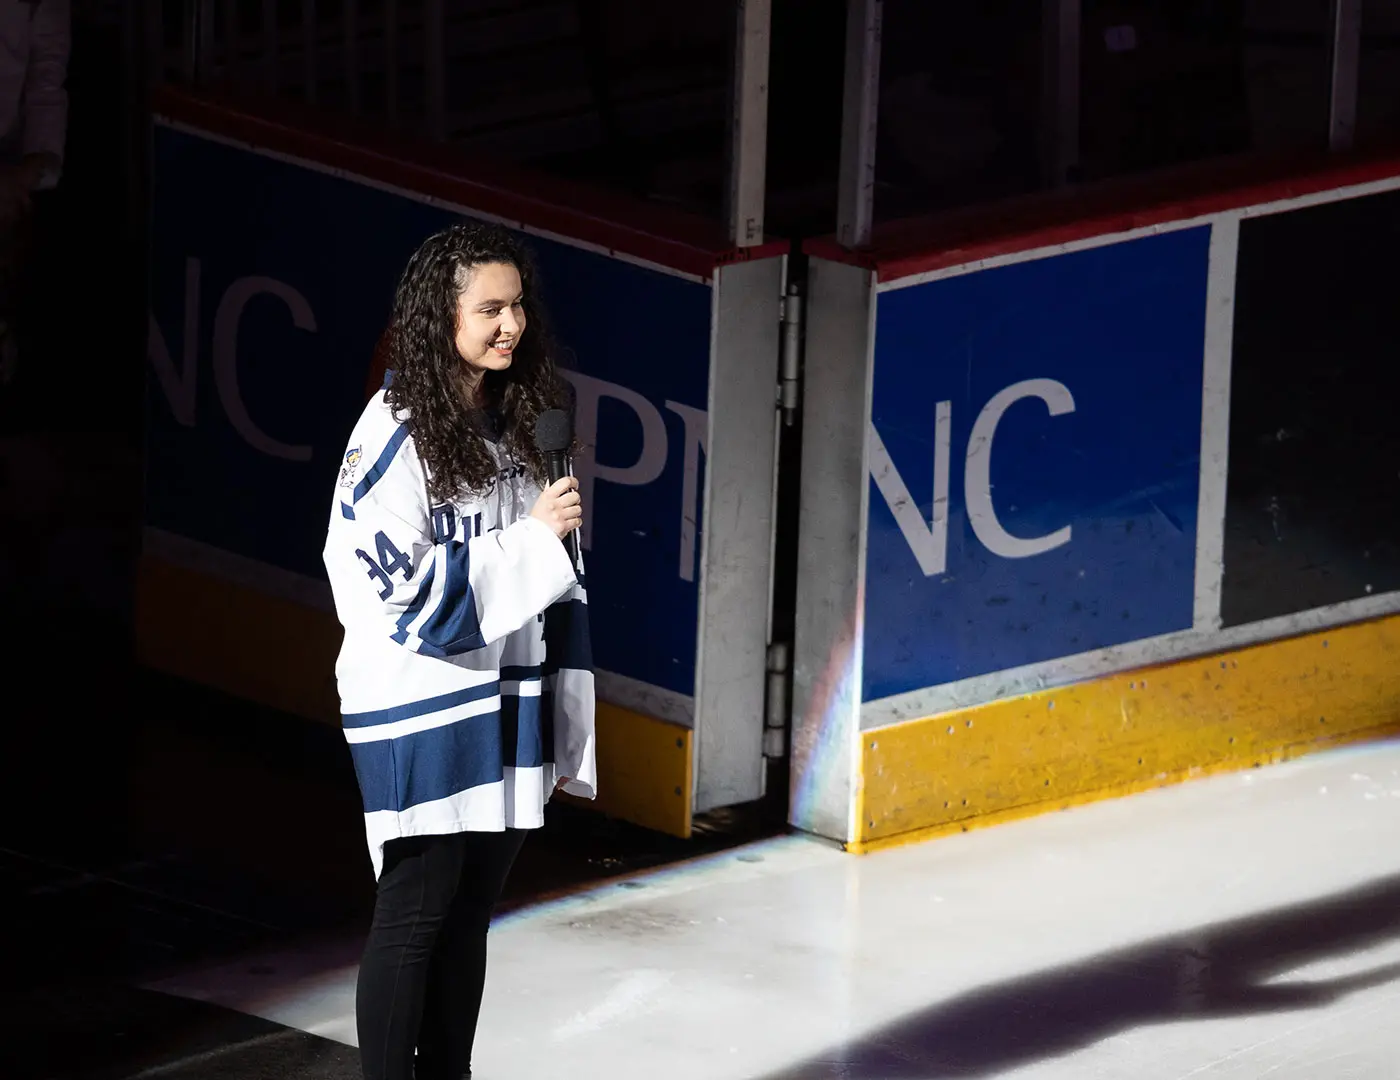 Physical therapy major Tate Murphy sings the national anthem at a Hershey Bears game